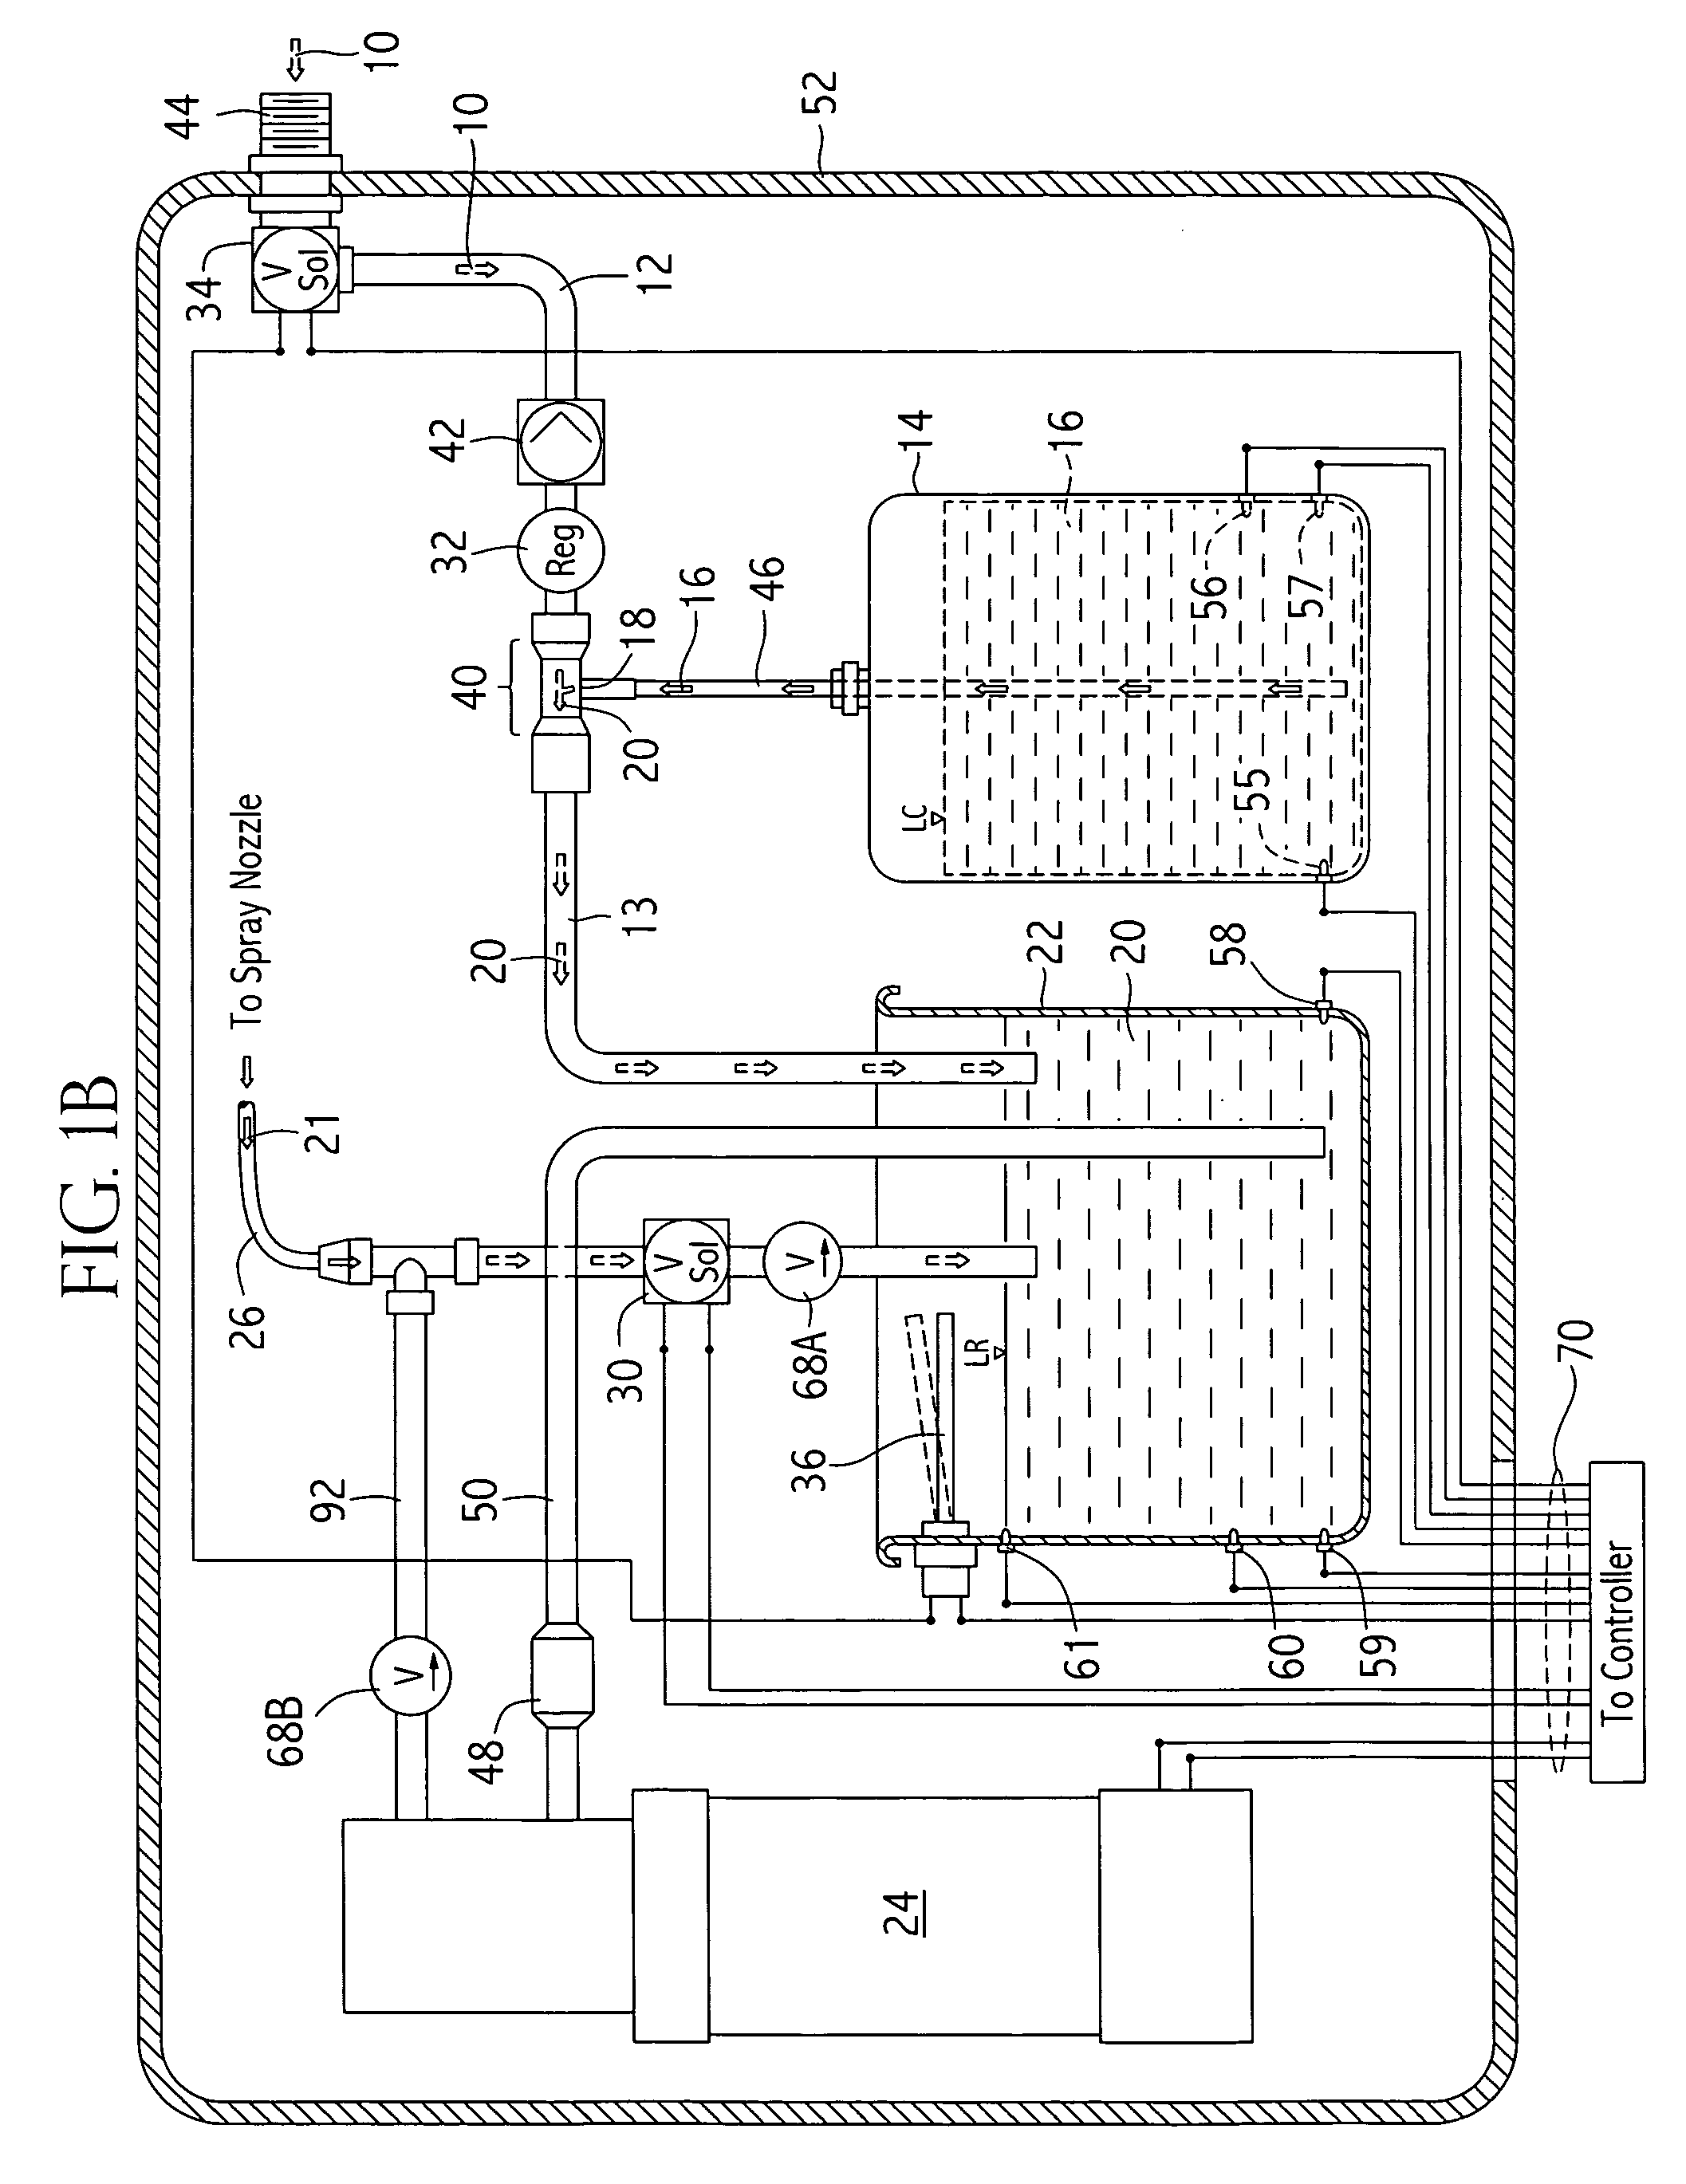 Systems and methods for dispensing liquids